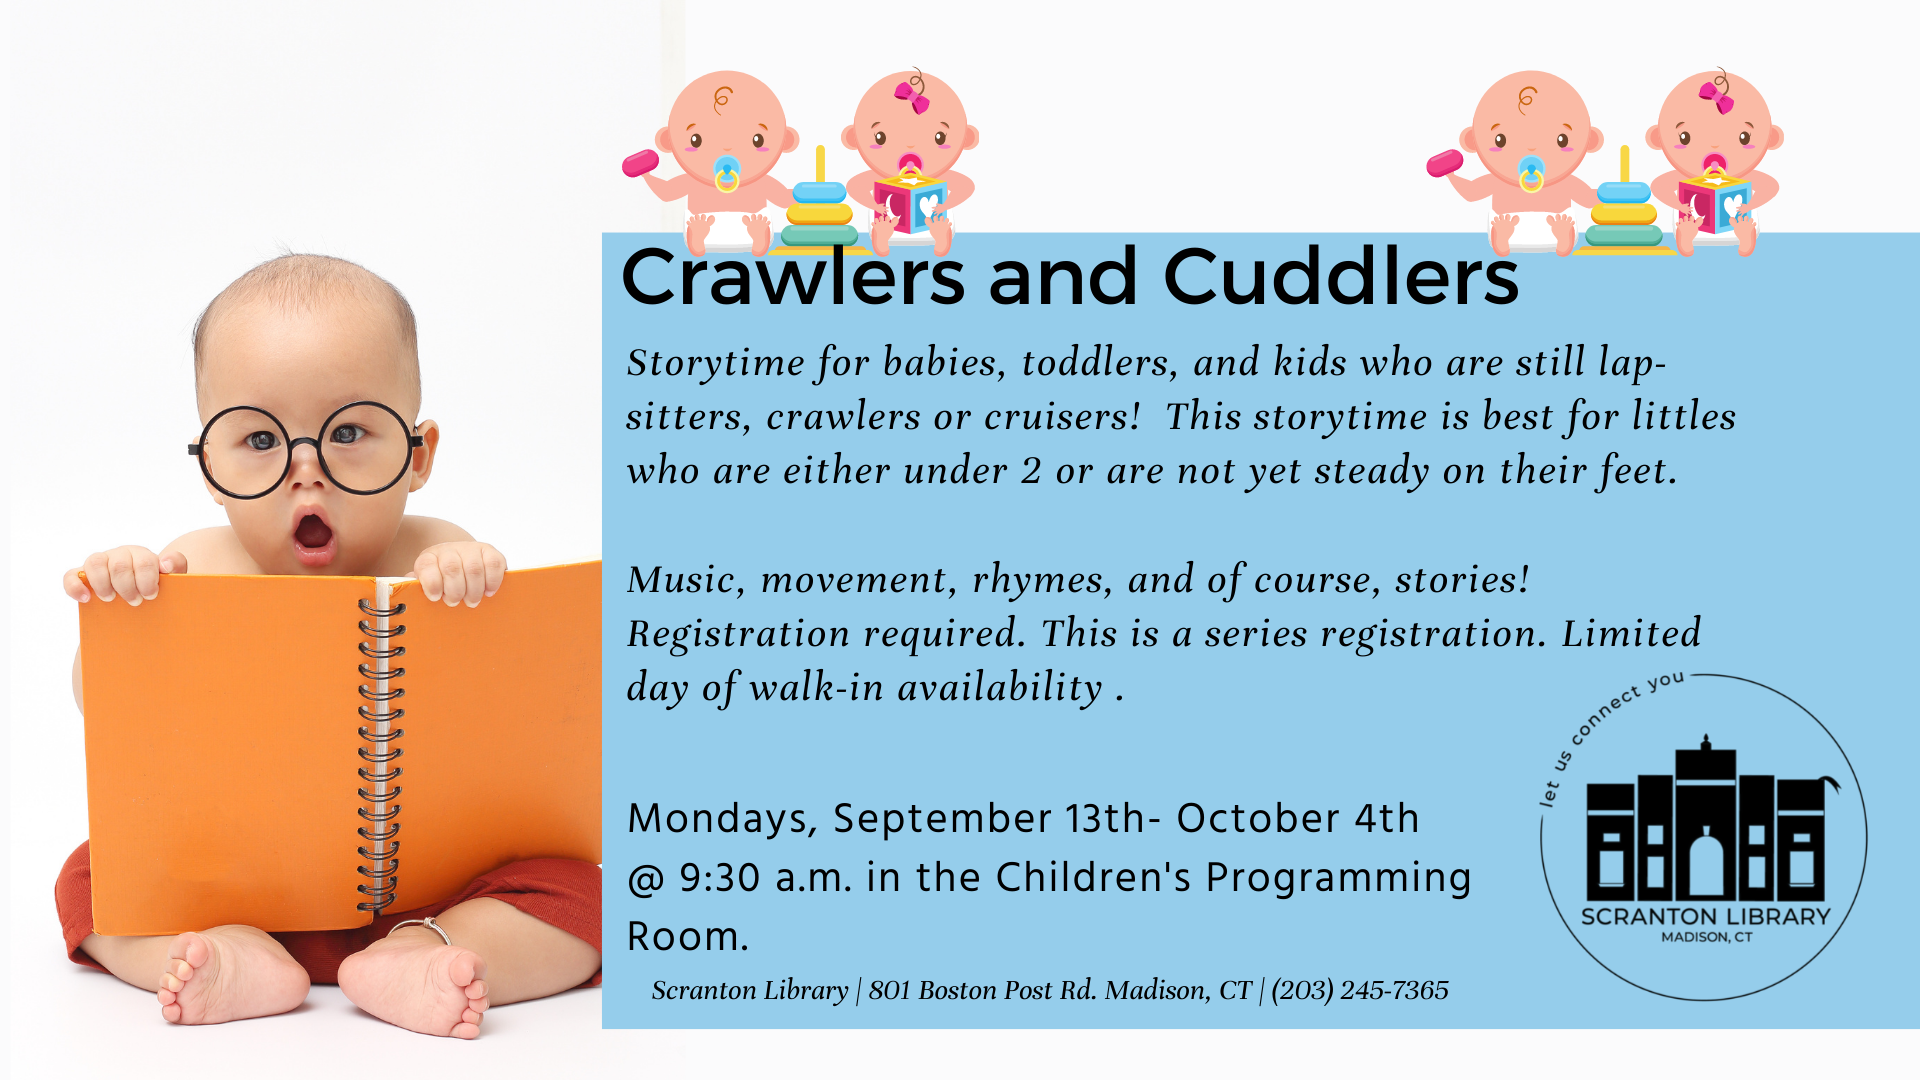 Crawlers and Cuddlers